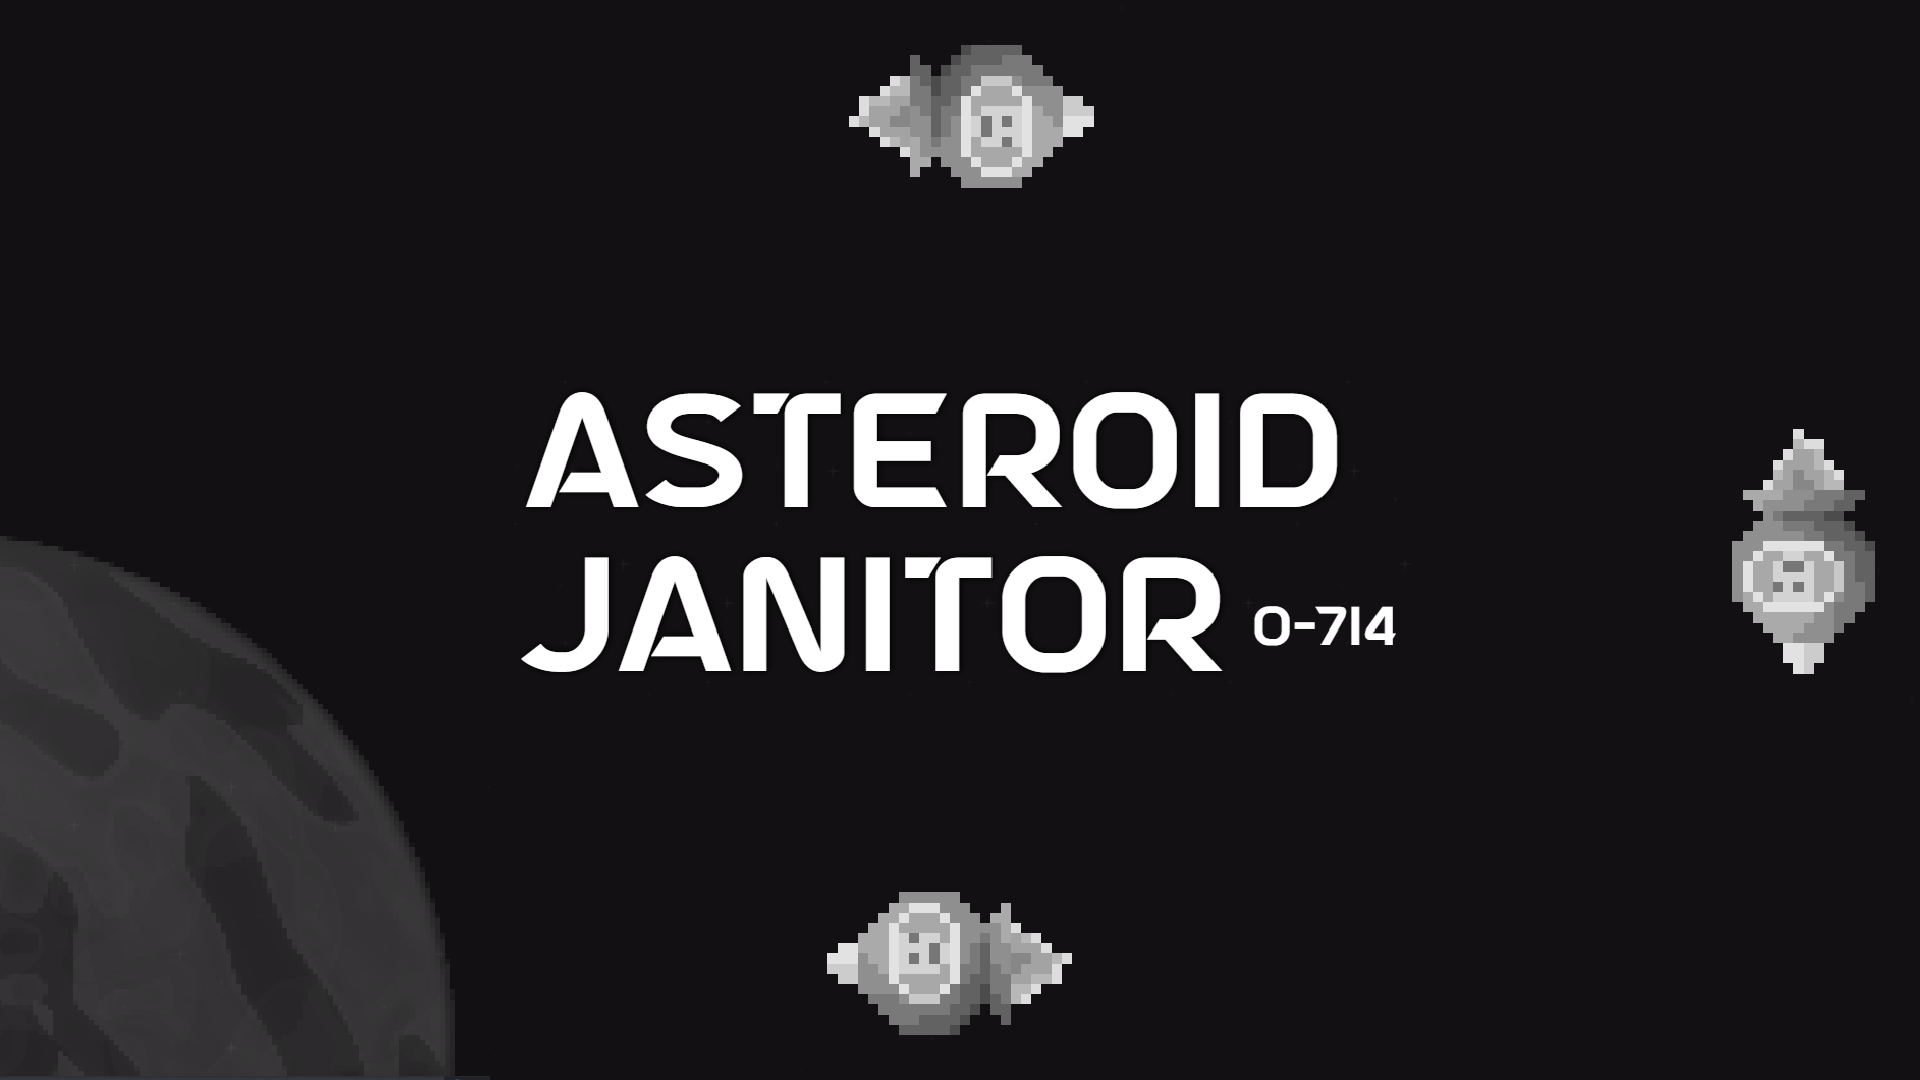 Asteroid Janitor O-714